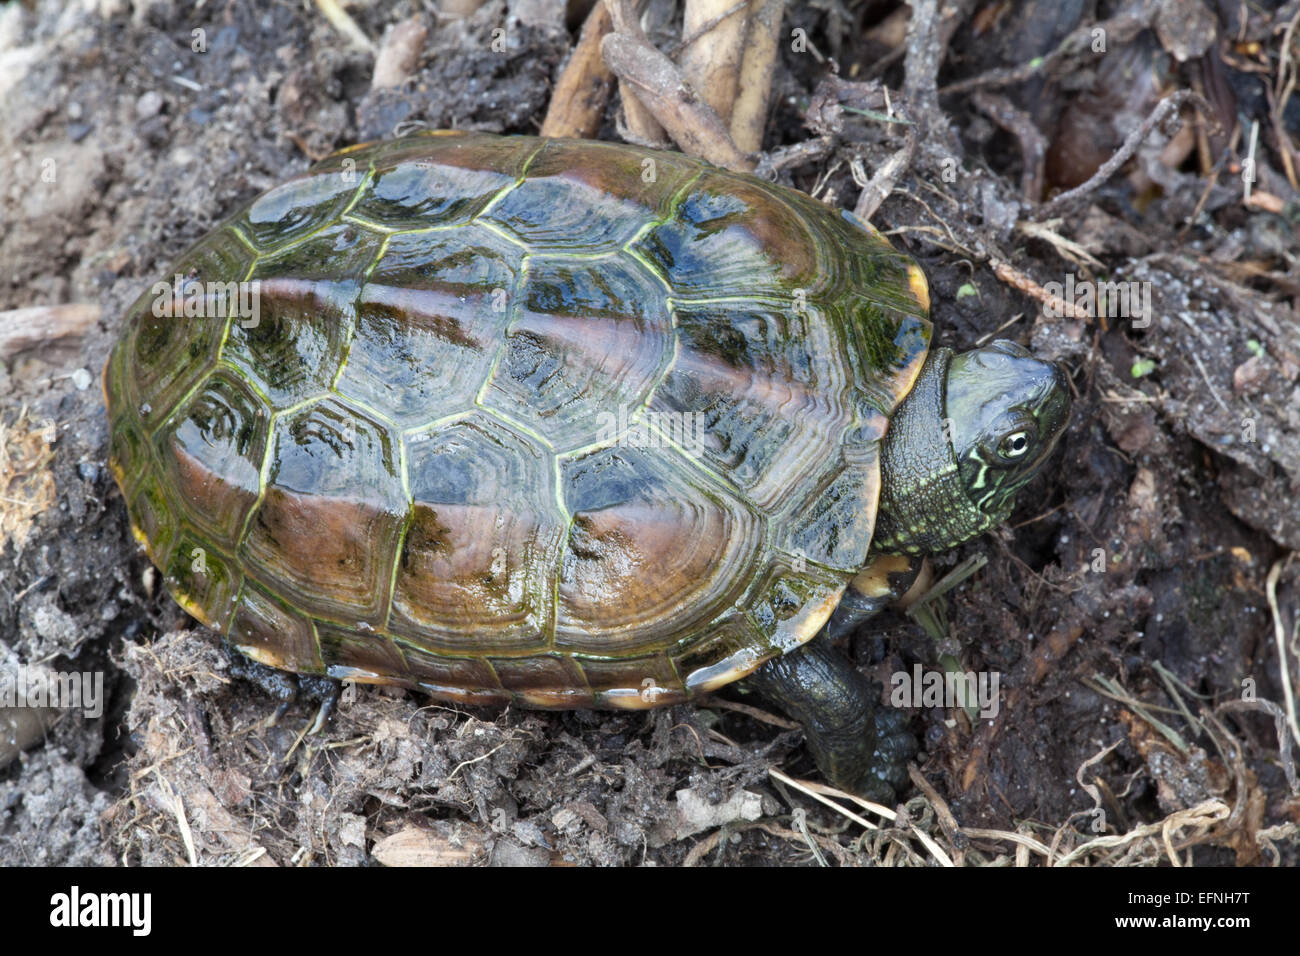 Chinese Pond, Three-keeled Pond, or Reeve's Turtle.  Mauremys (Chinemys) reevesii.  Threatened/Endangered native Chin Stock Photo